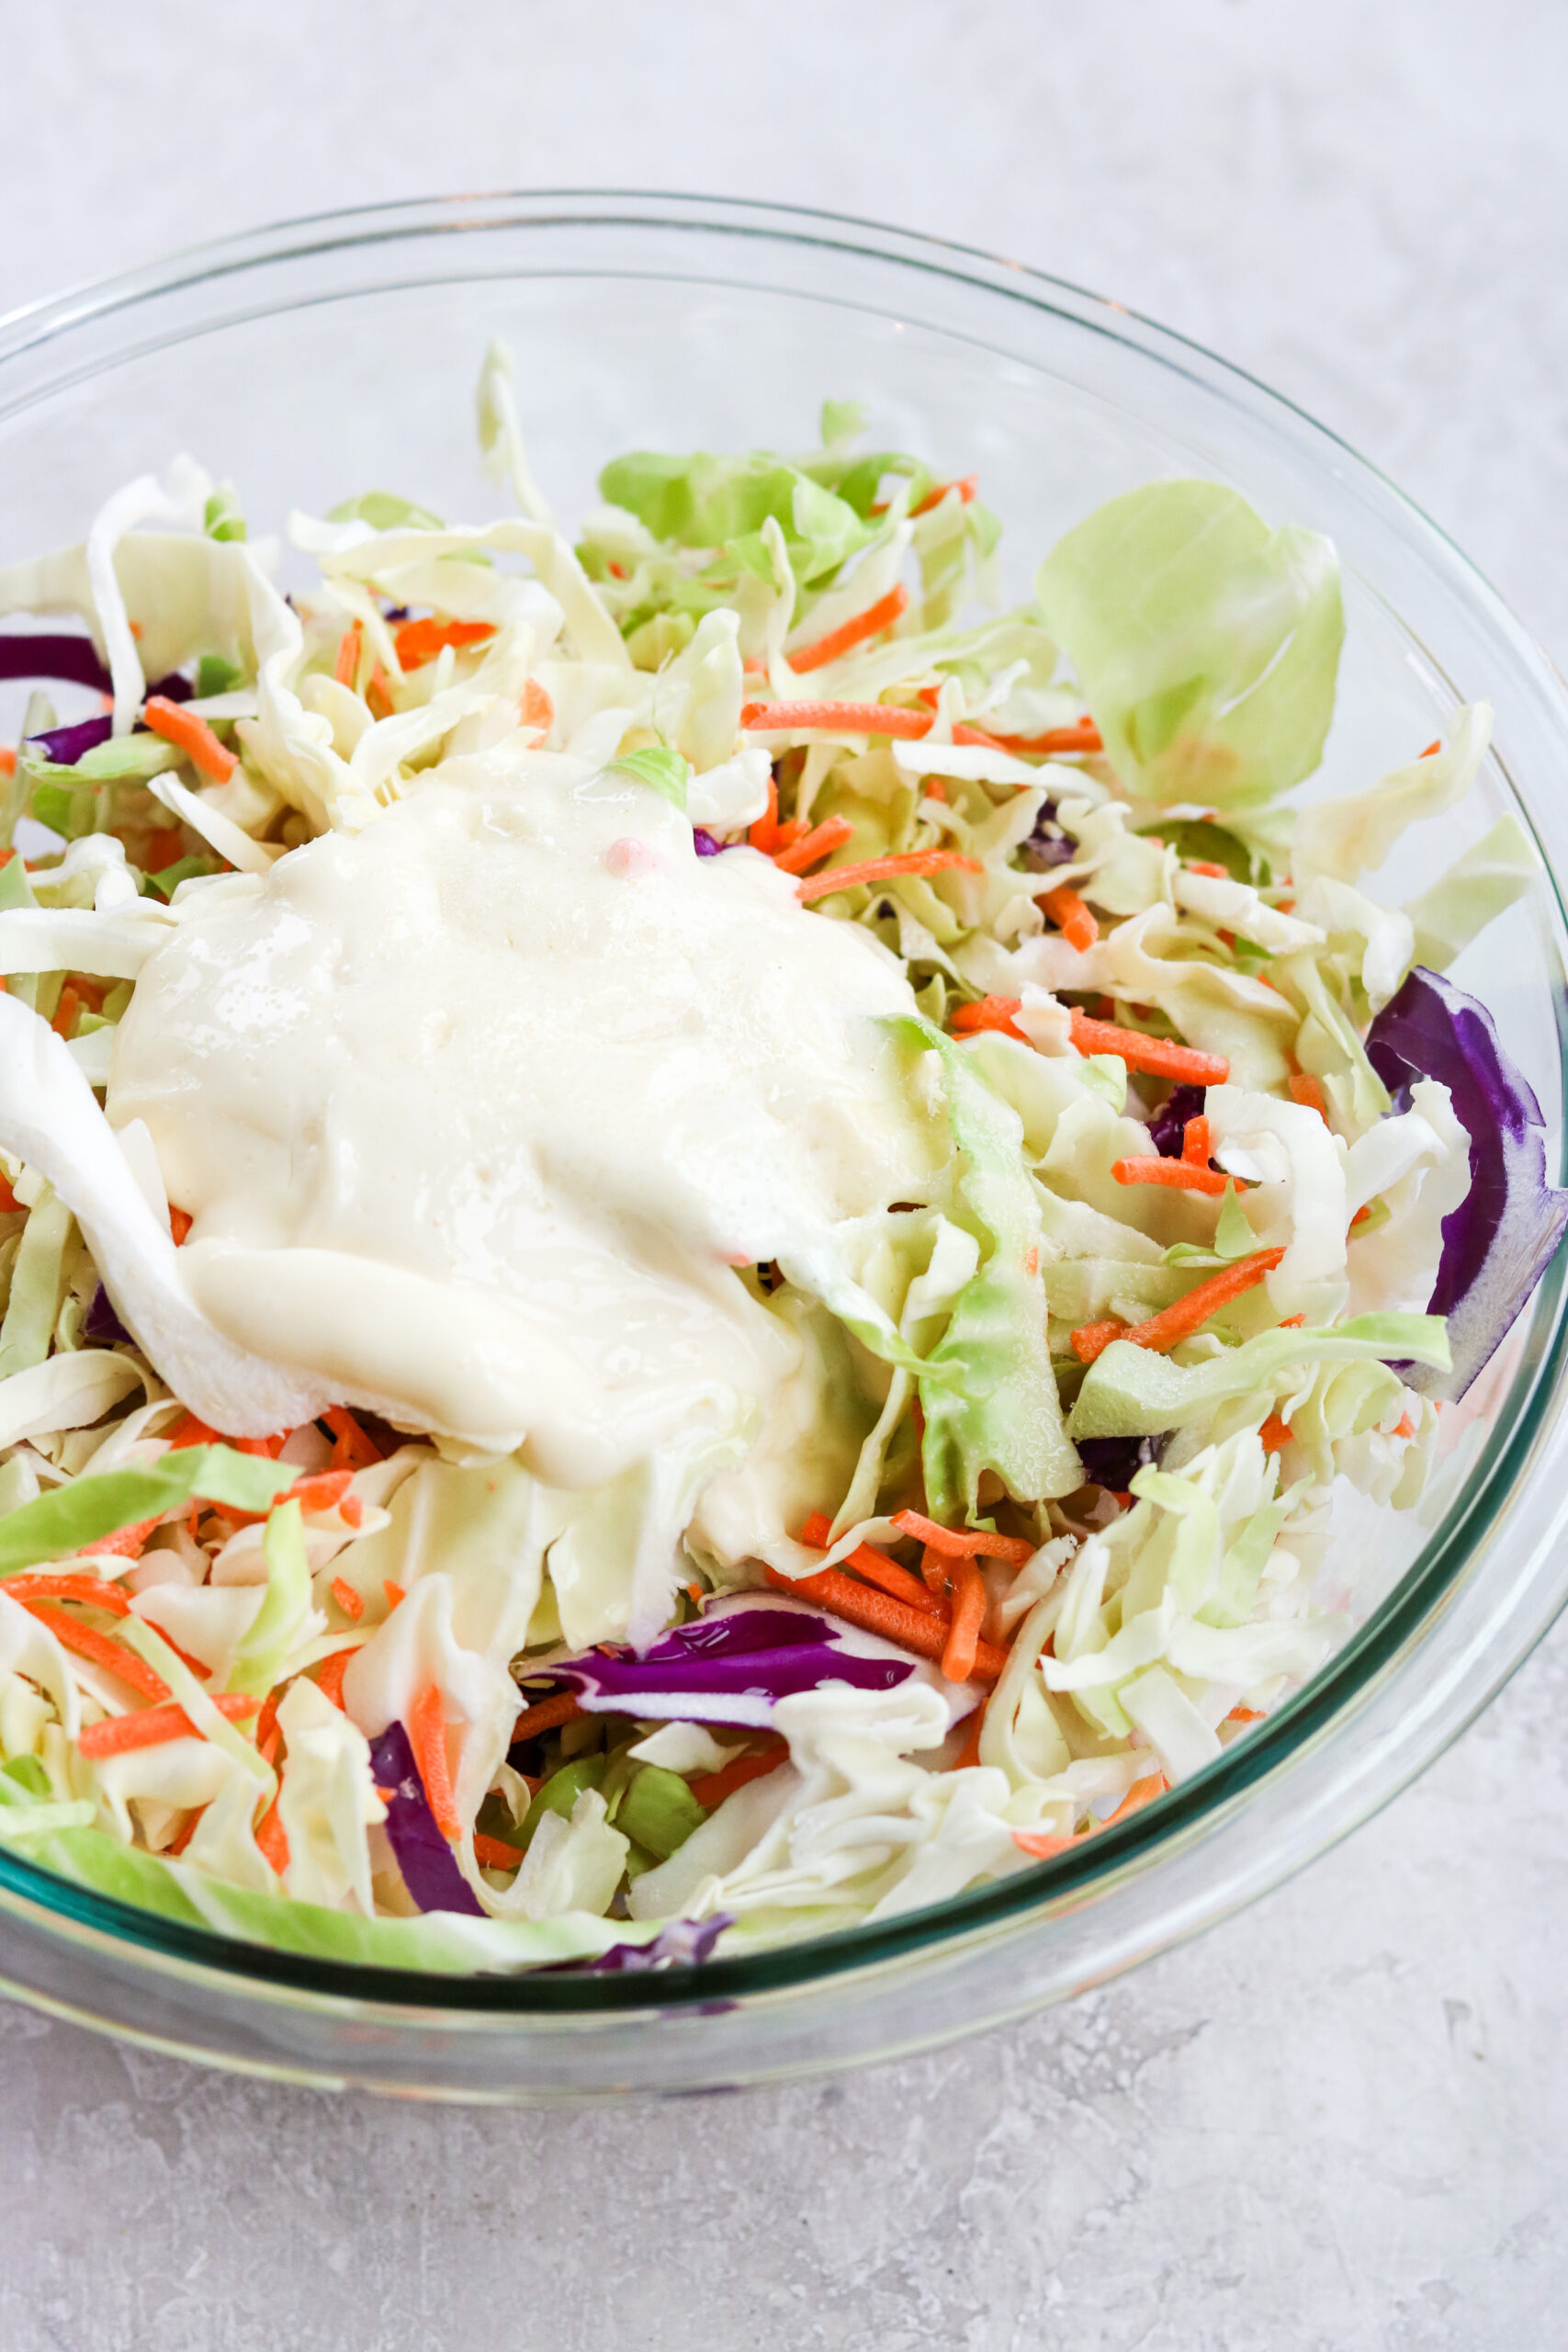 shredded cabbage, carrots, and mayo in a clear glass bowl